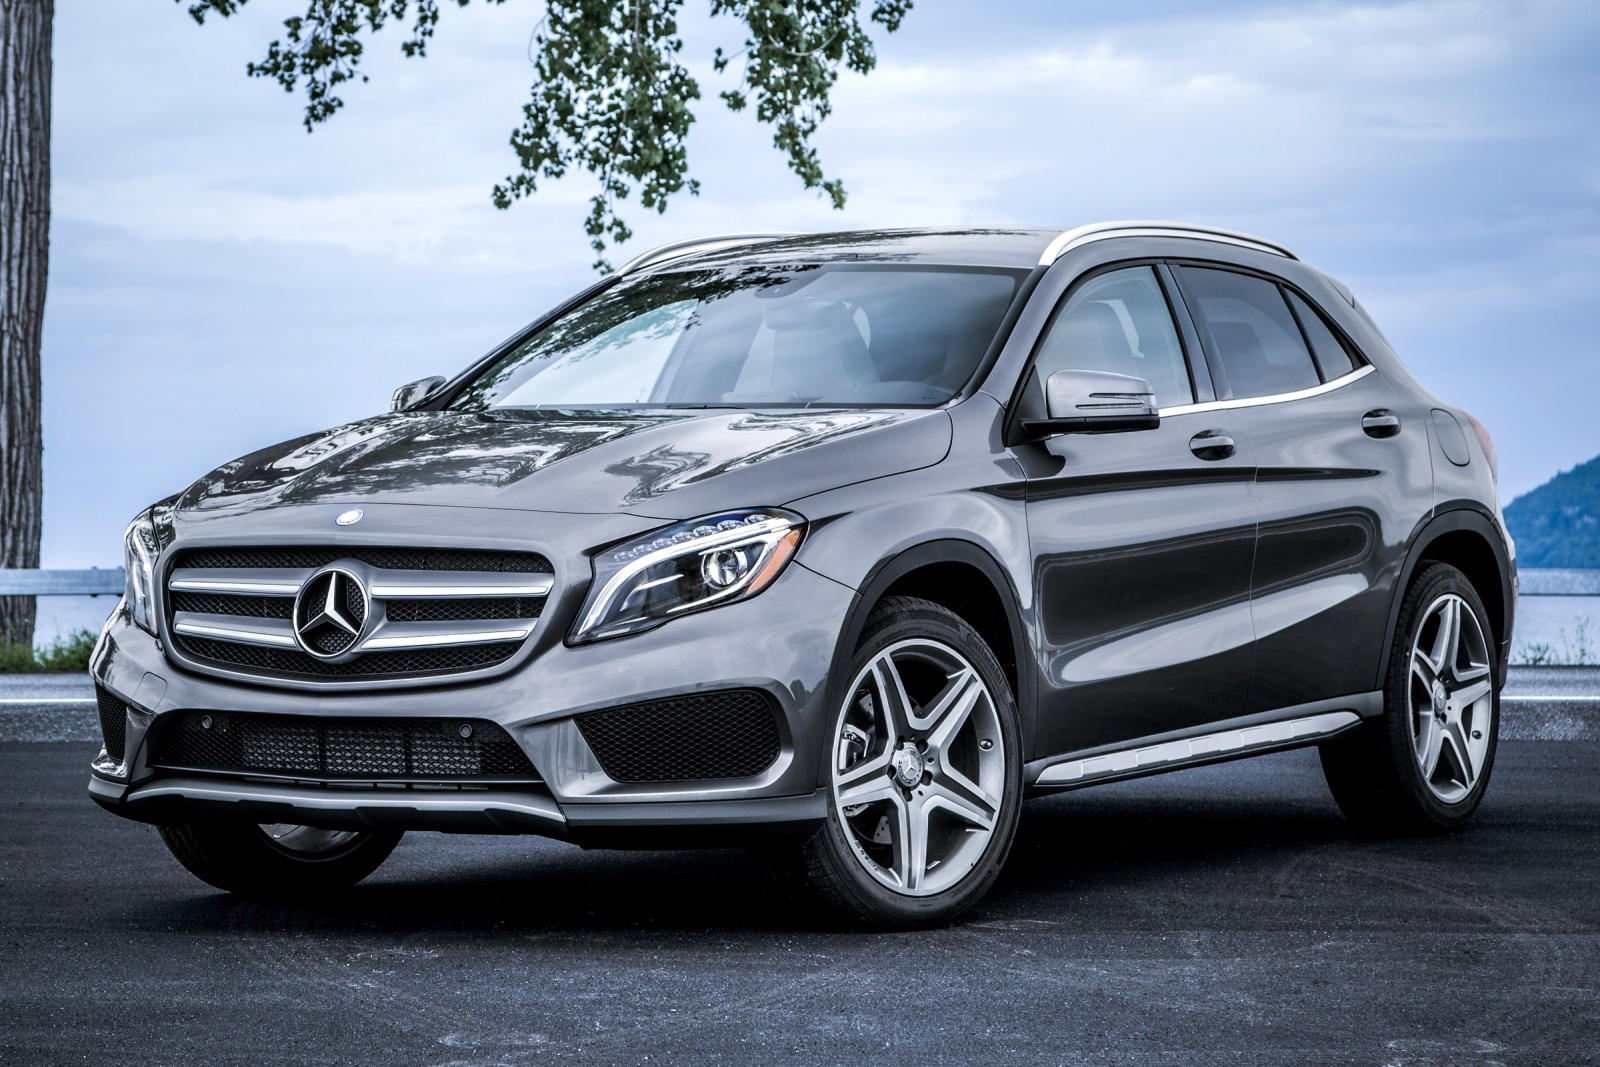 2017 Mercedes-Benz GLA-Class SUV: Review, Trims, Specs, Price, New Interior  Features, Exterior Design, and Specifications | CarBuzz